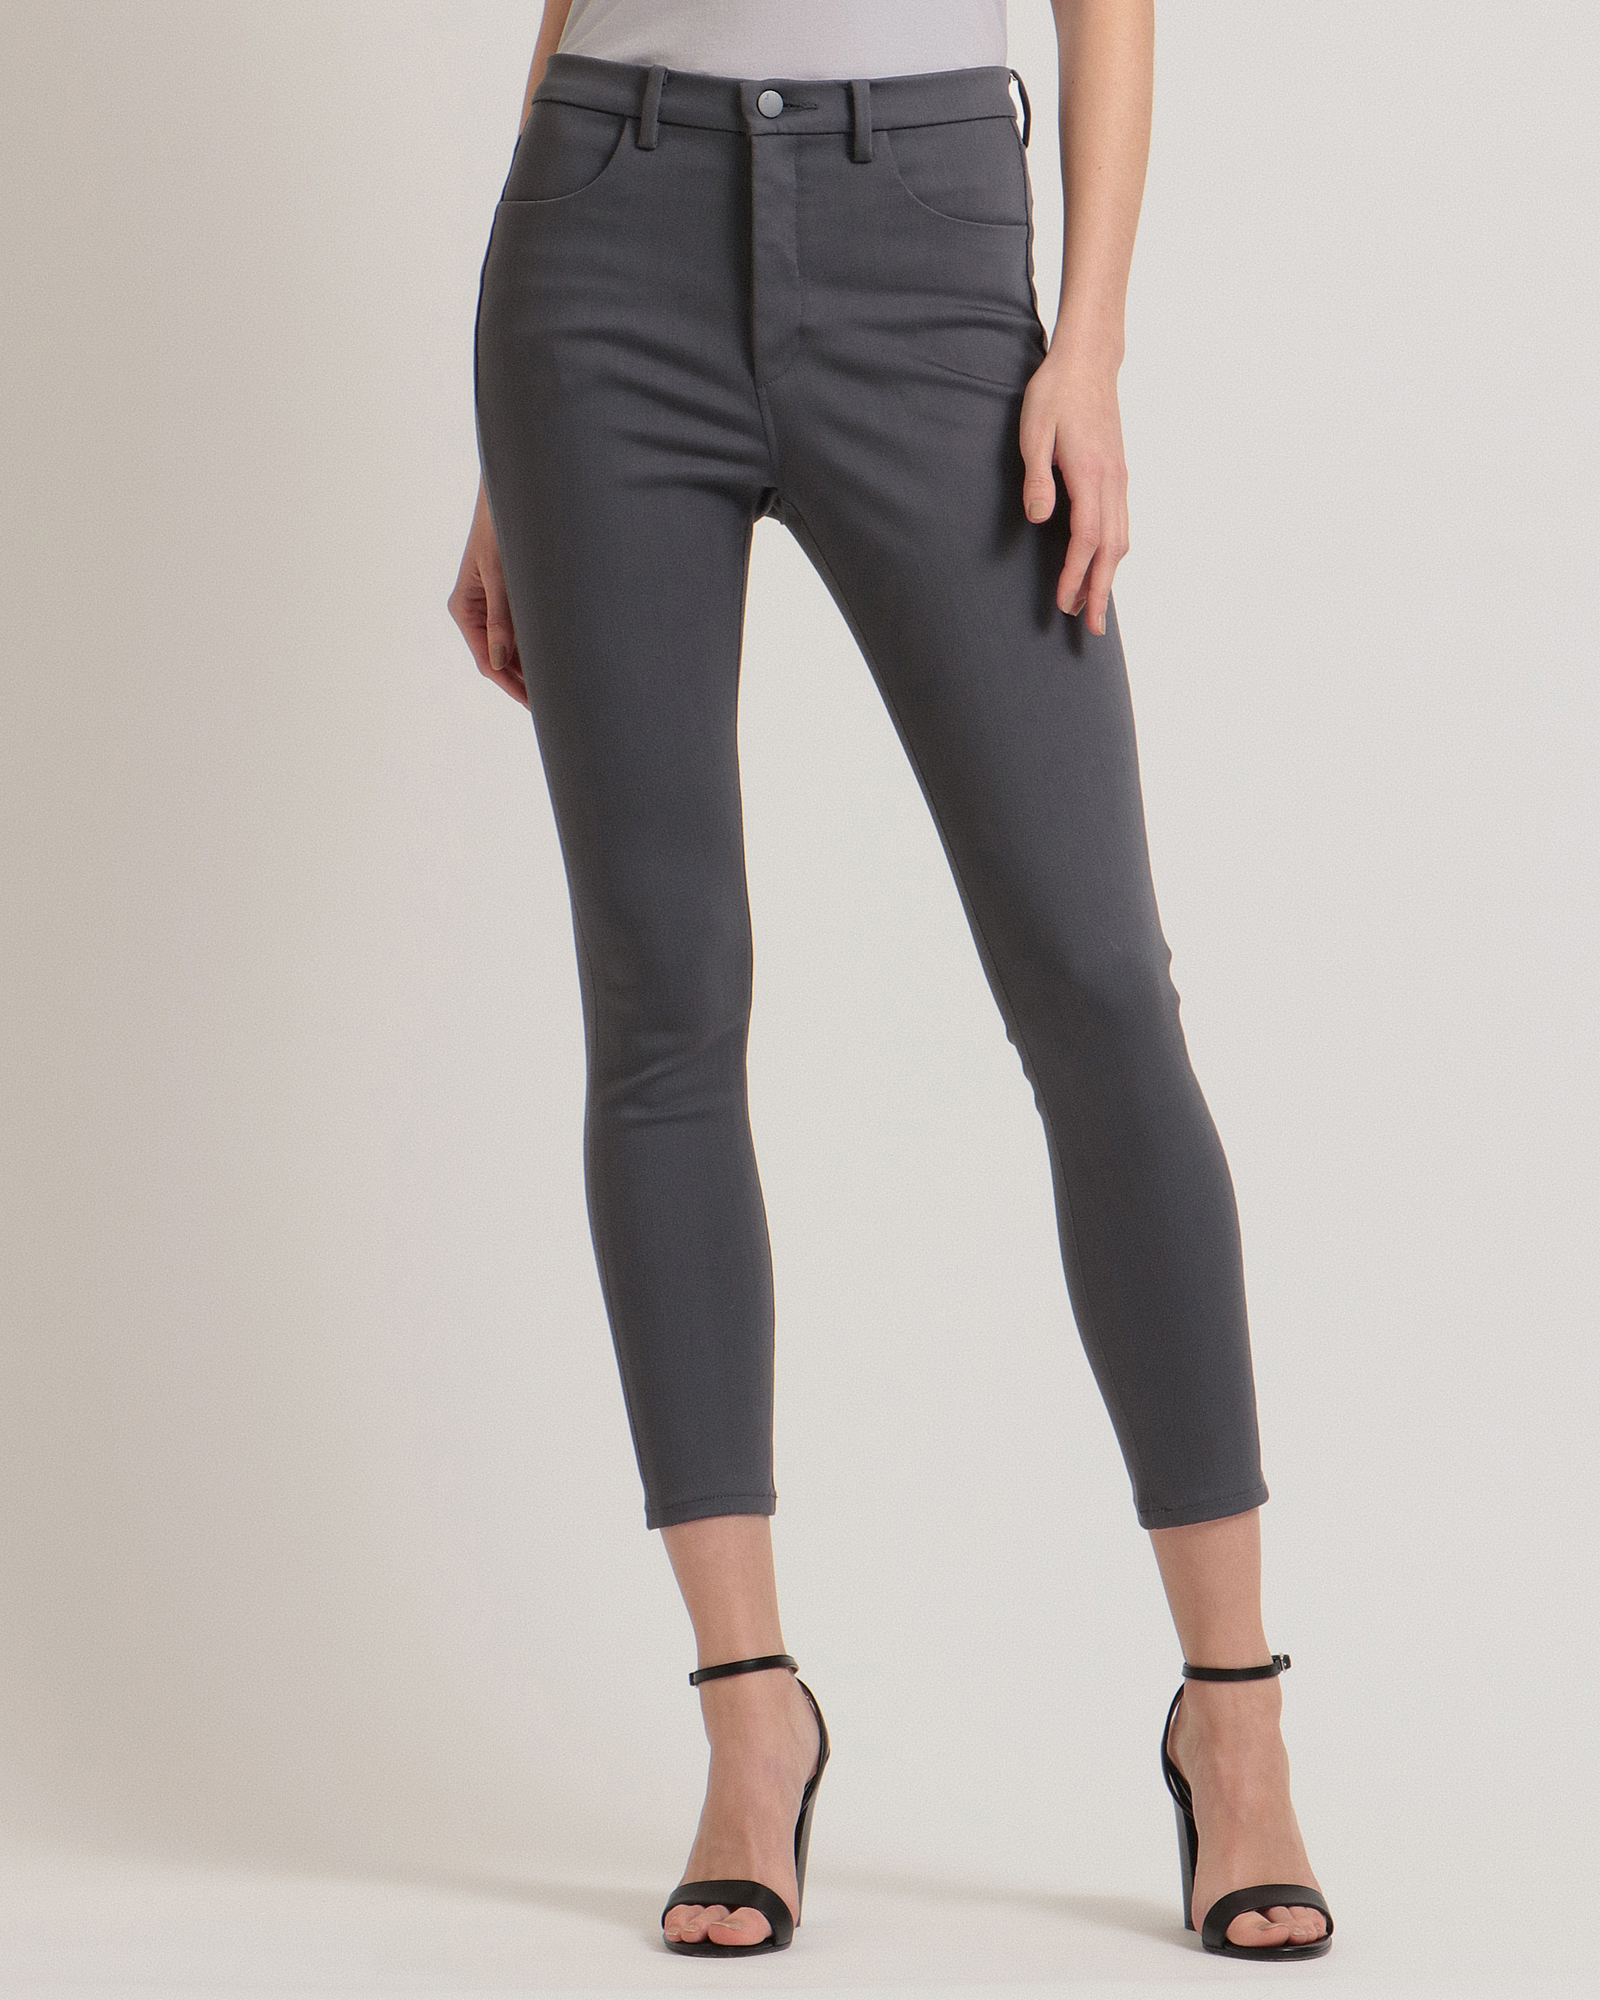 J Brand Jeggings | WOMEN（レディース）｜Theory 公式通販サイト